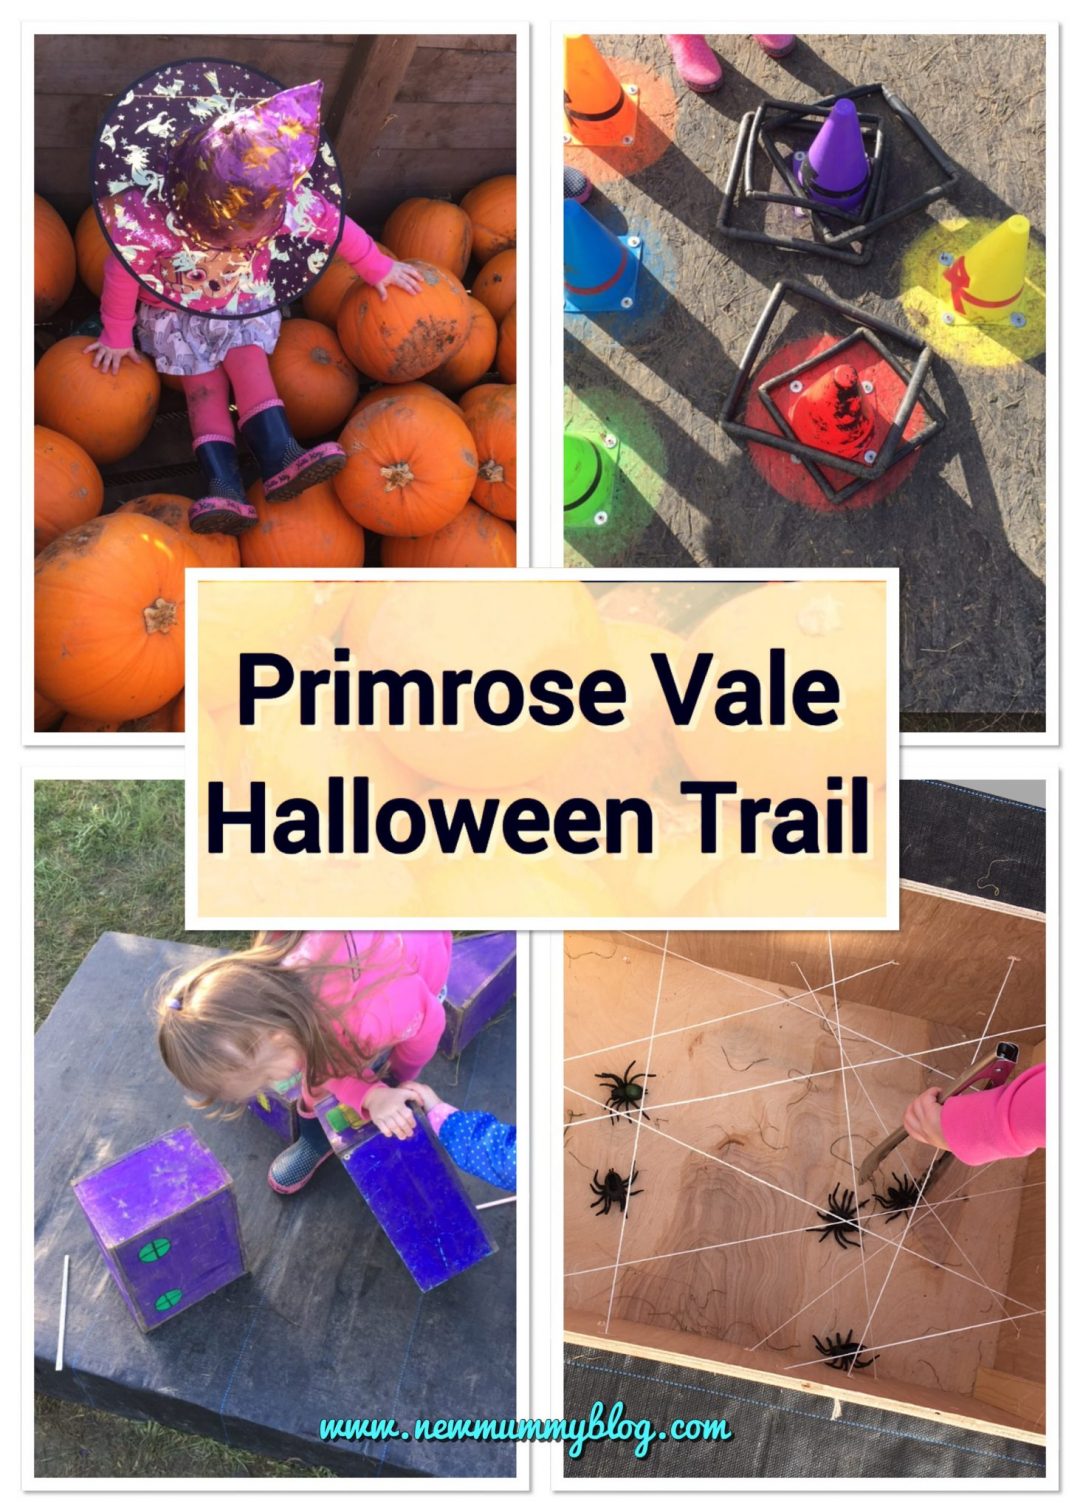 Primrose Vale Halloween Trail Cheltenham Days out and things to do Gloucestershire